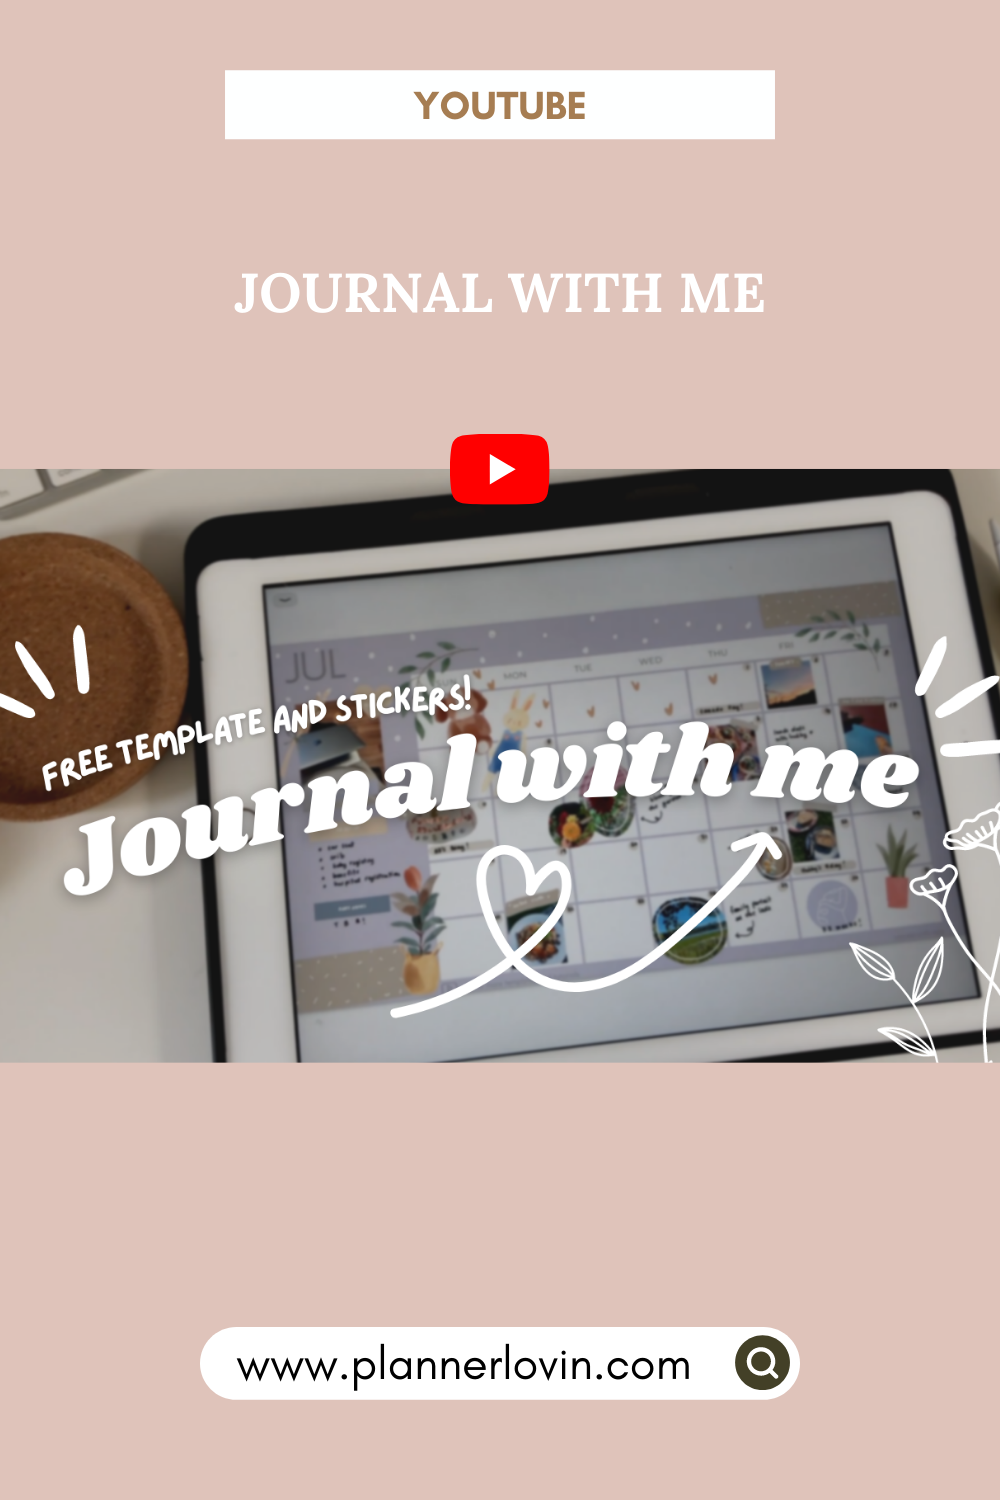 July Journal With Me - FREE template and digital stickers